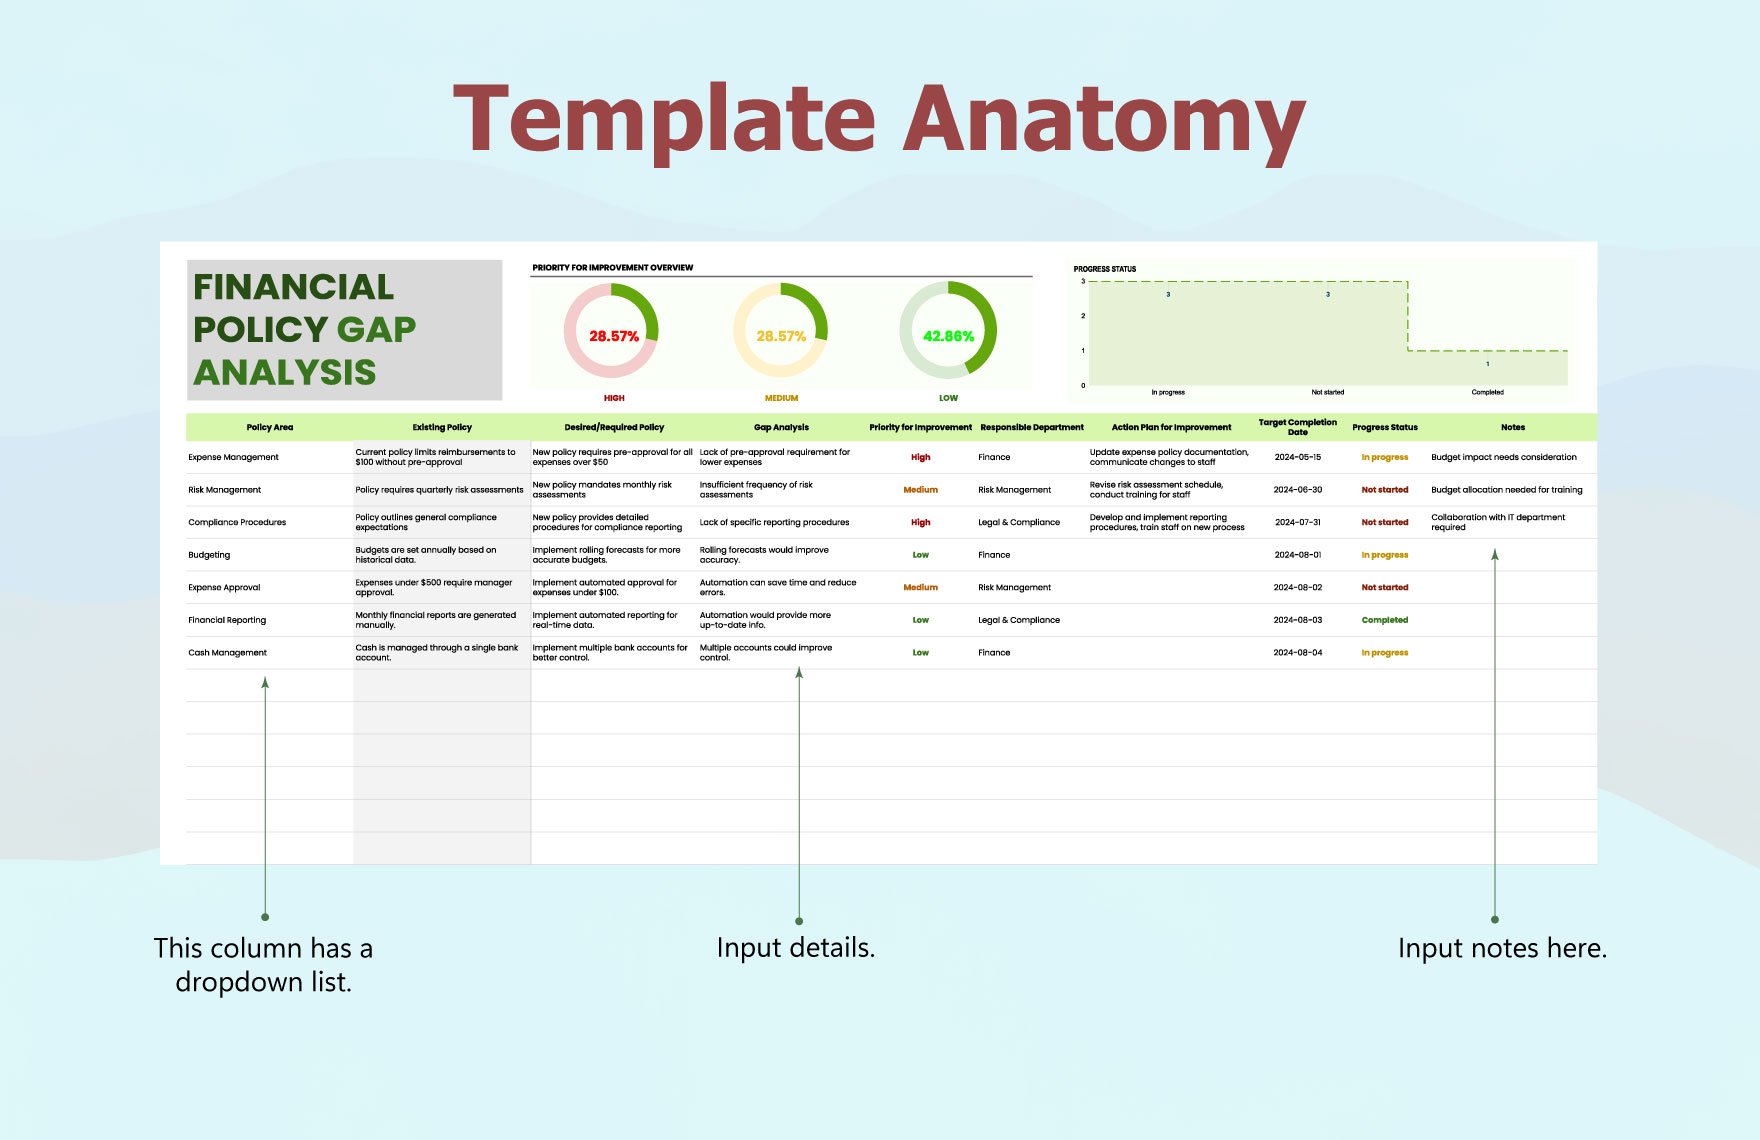 Financial Policy Gap Analysis Template